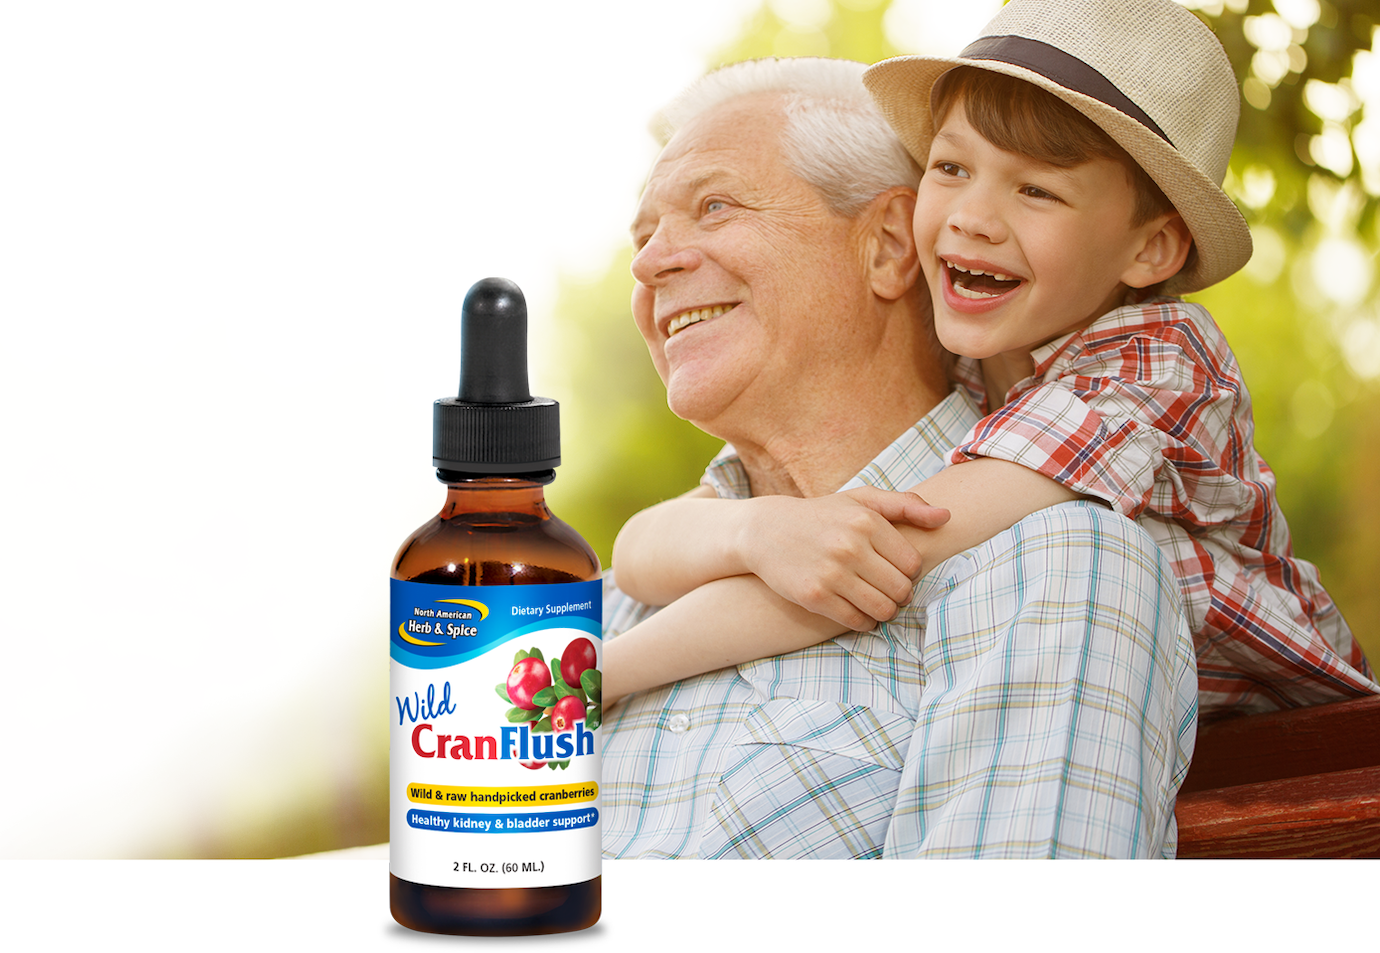 Grandpa and kid featuring CranFlush product